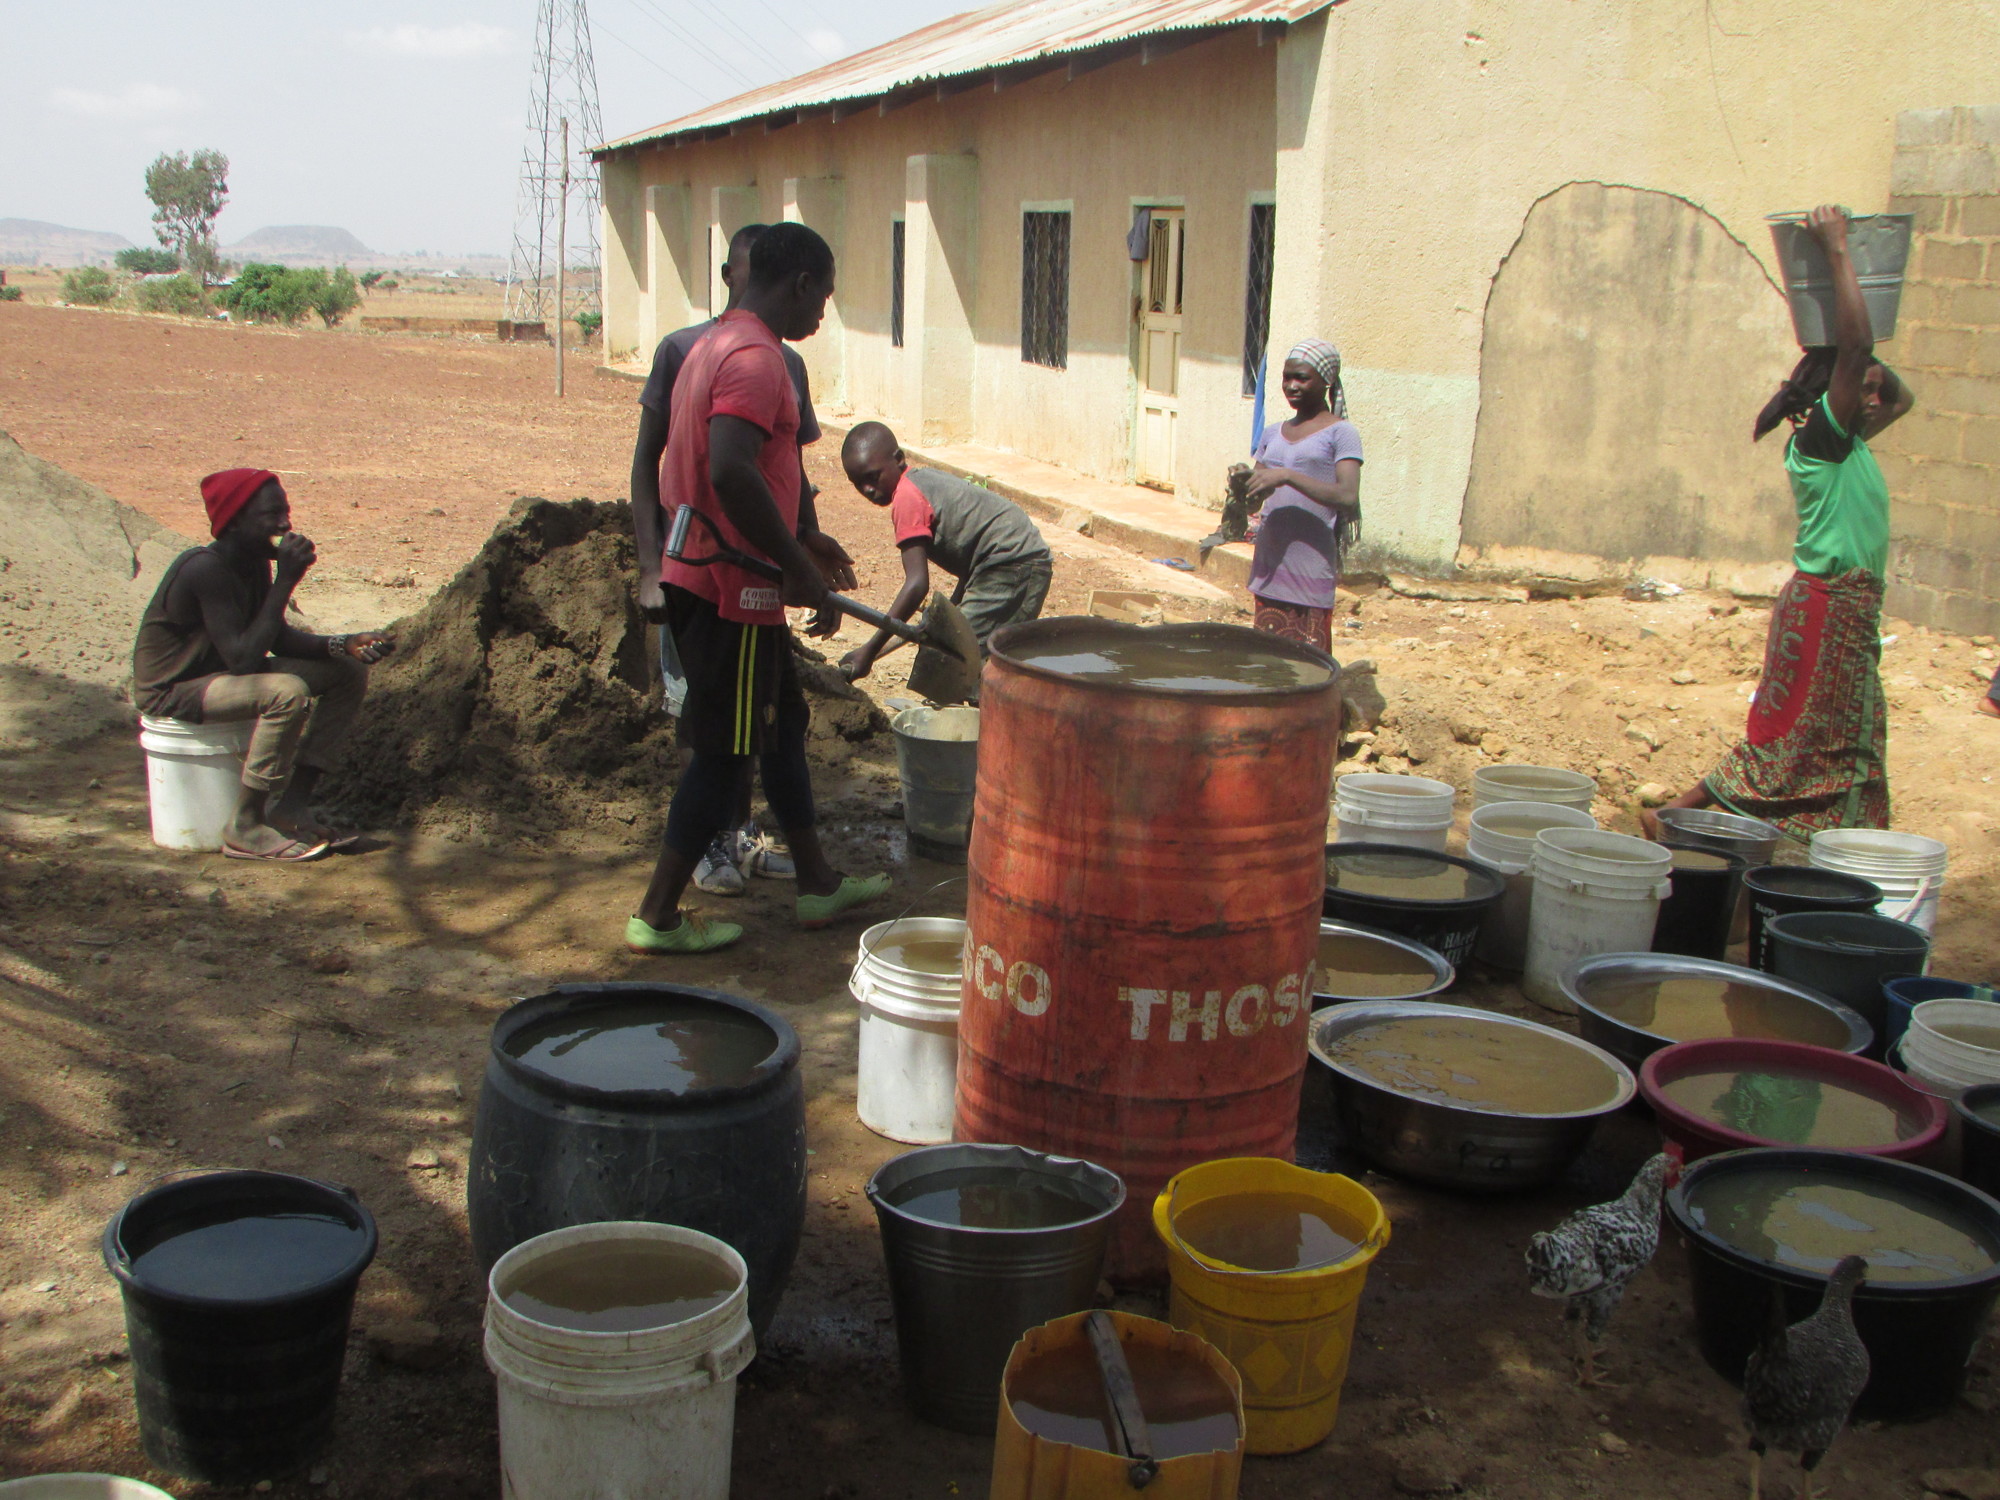 Women fetch water so the men can mix concrete for the house construction.